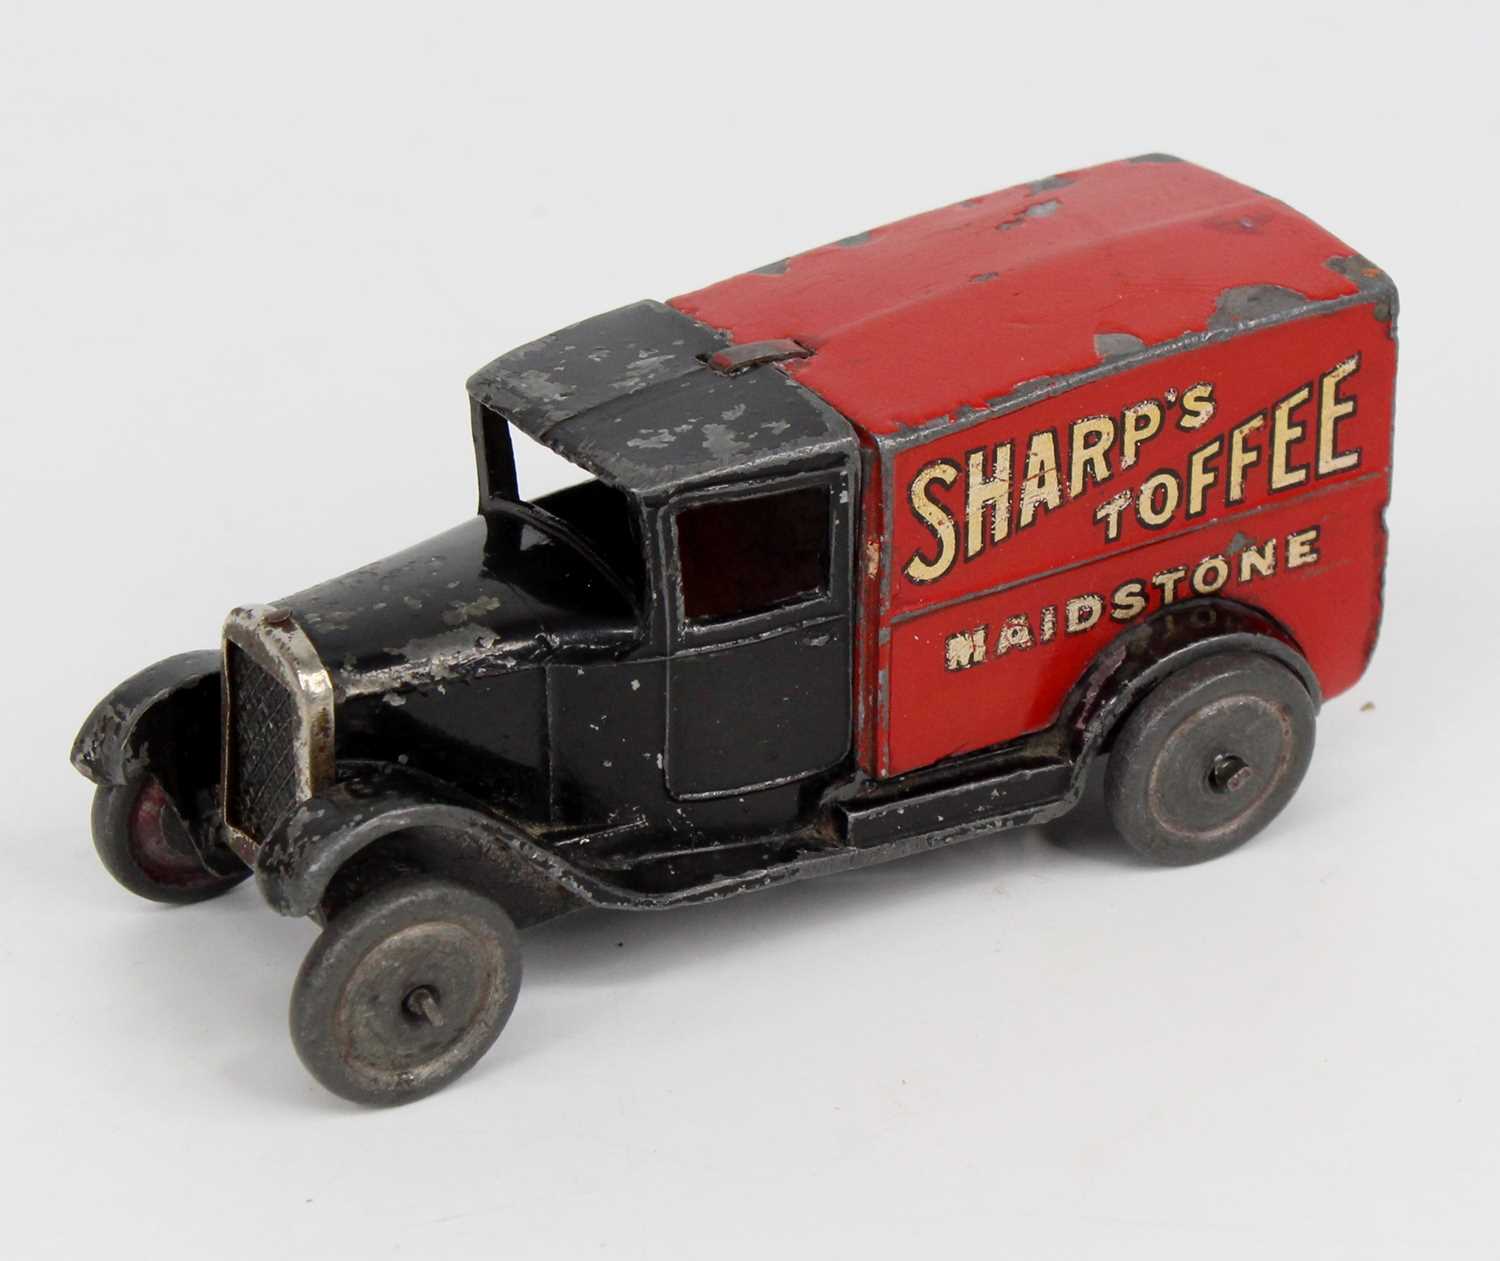 Dinky Toys, 28H pre-war delivery van, 'Sharps Toffee Maidstone' type 1 example, Dinky Toys cast to